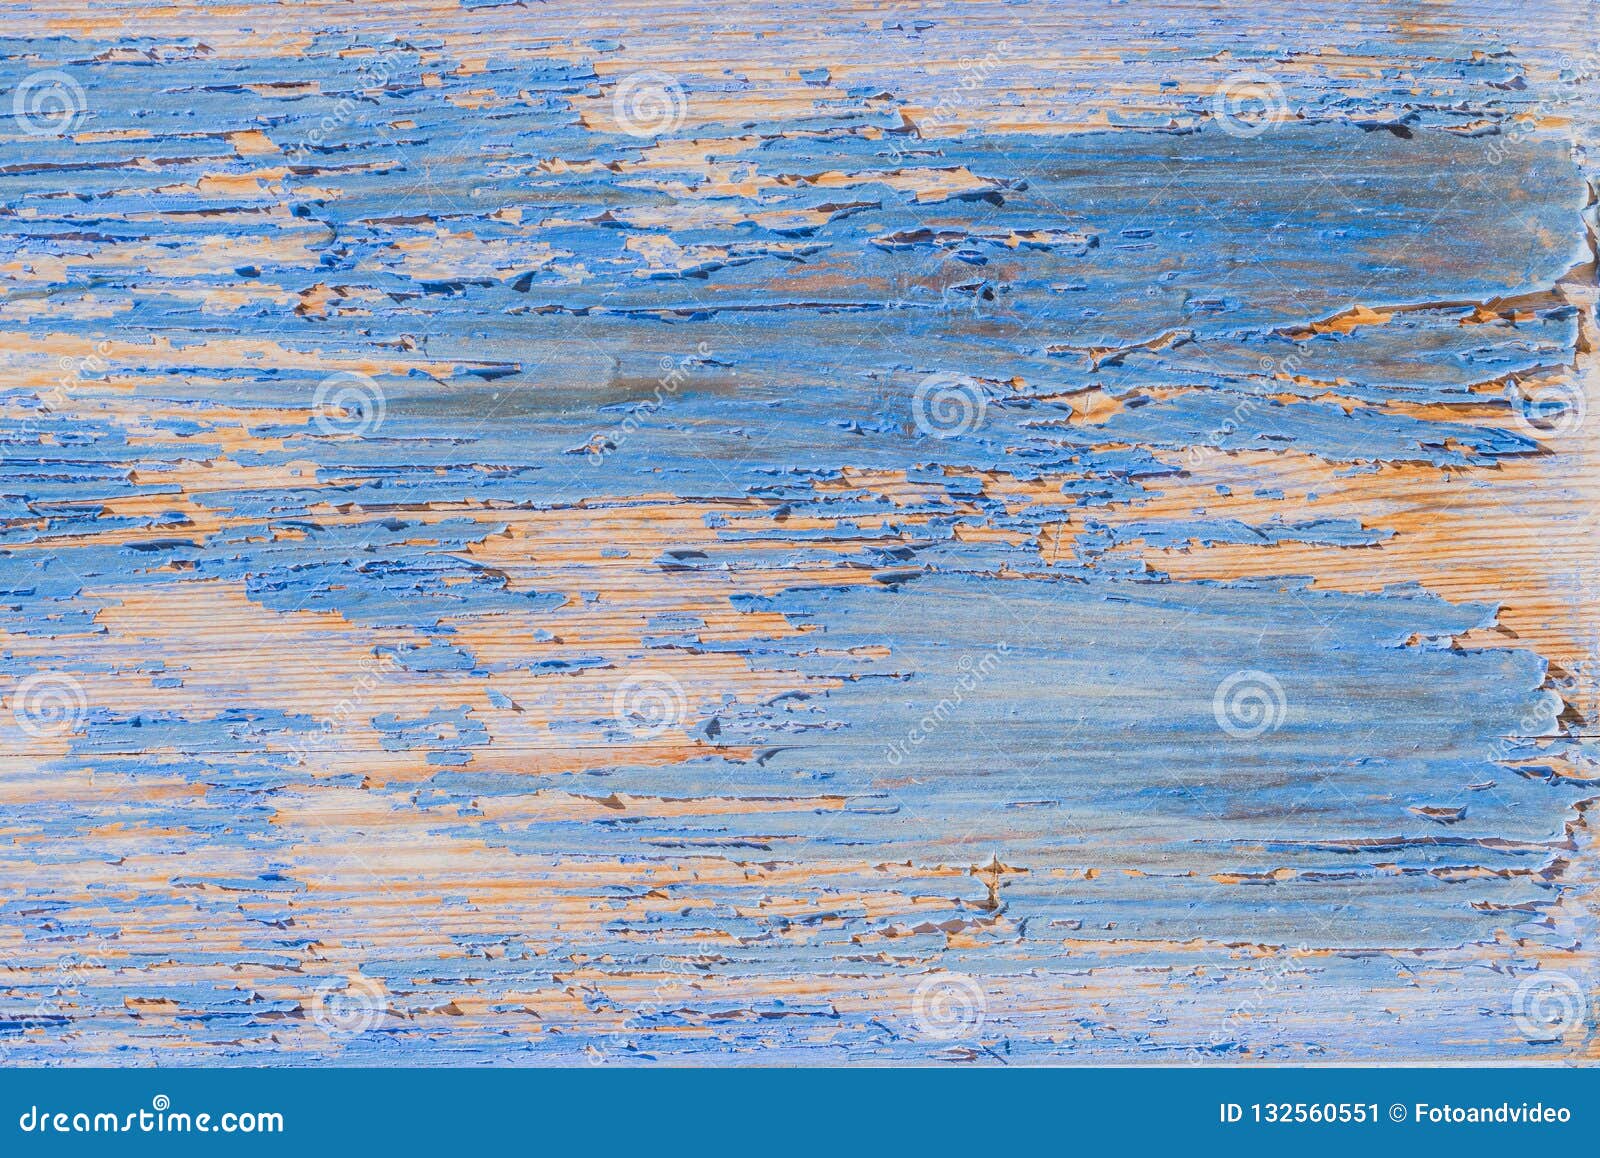 Shabby Blue Wood Texture With Peeled Paint, Close-up Stock Image ...